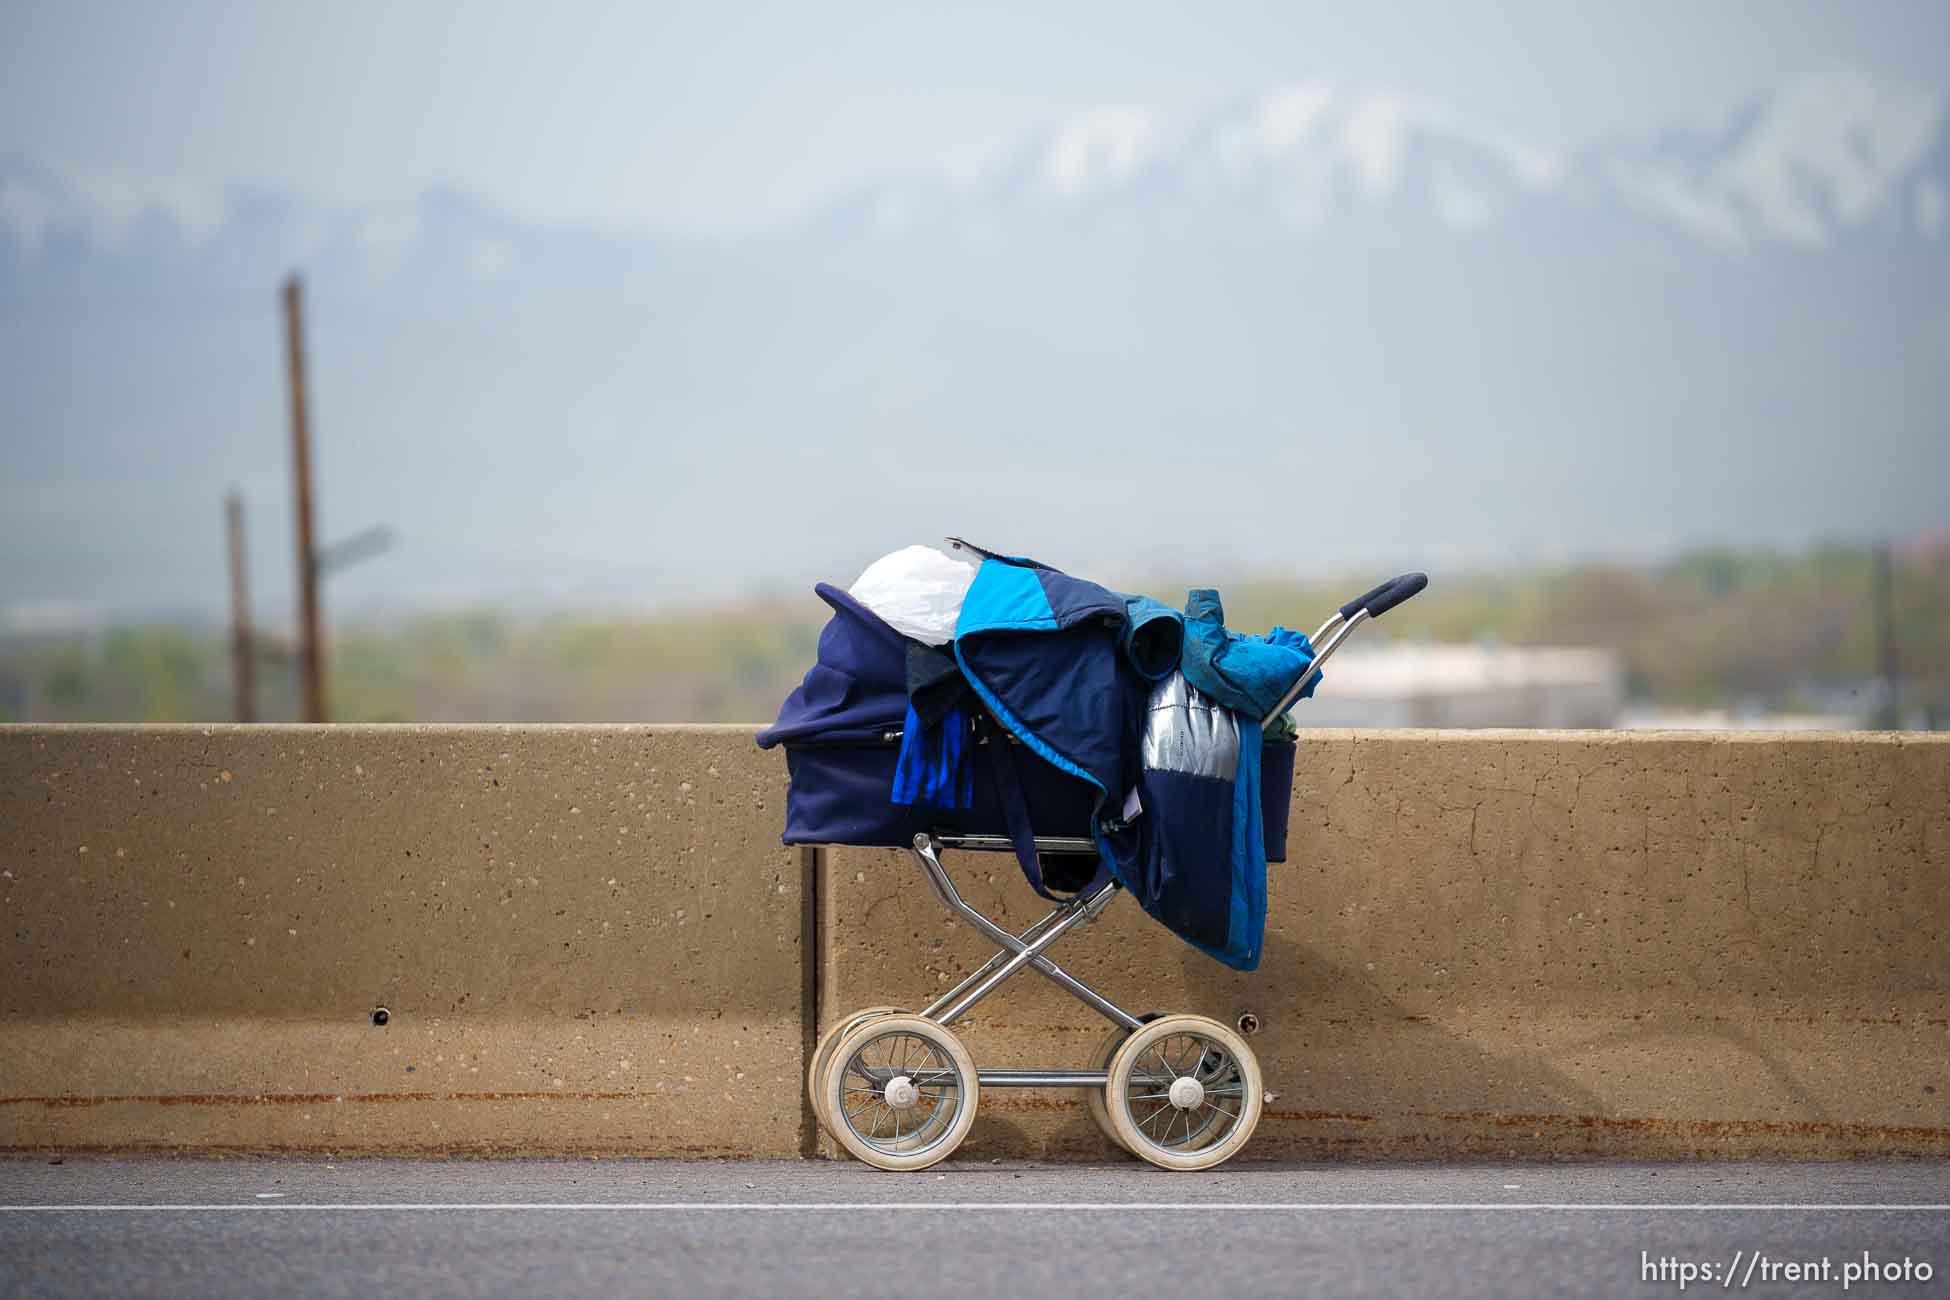 (Trent Nelson  |  The Salt Lake Tribune) A baby stroller the side of Victory Road road as camps are cleared in the foothills north of Salt Lake City on Wednesday, April 27, 2022.